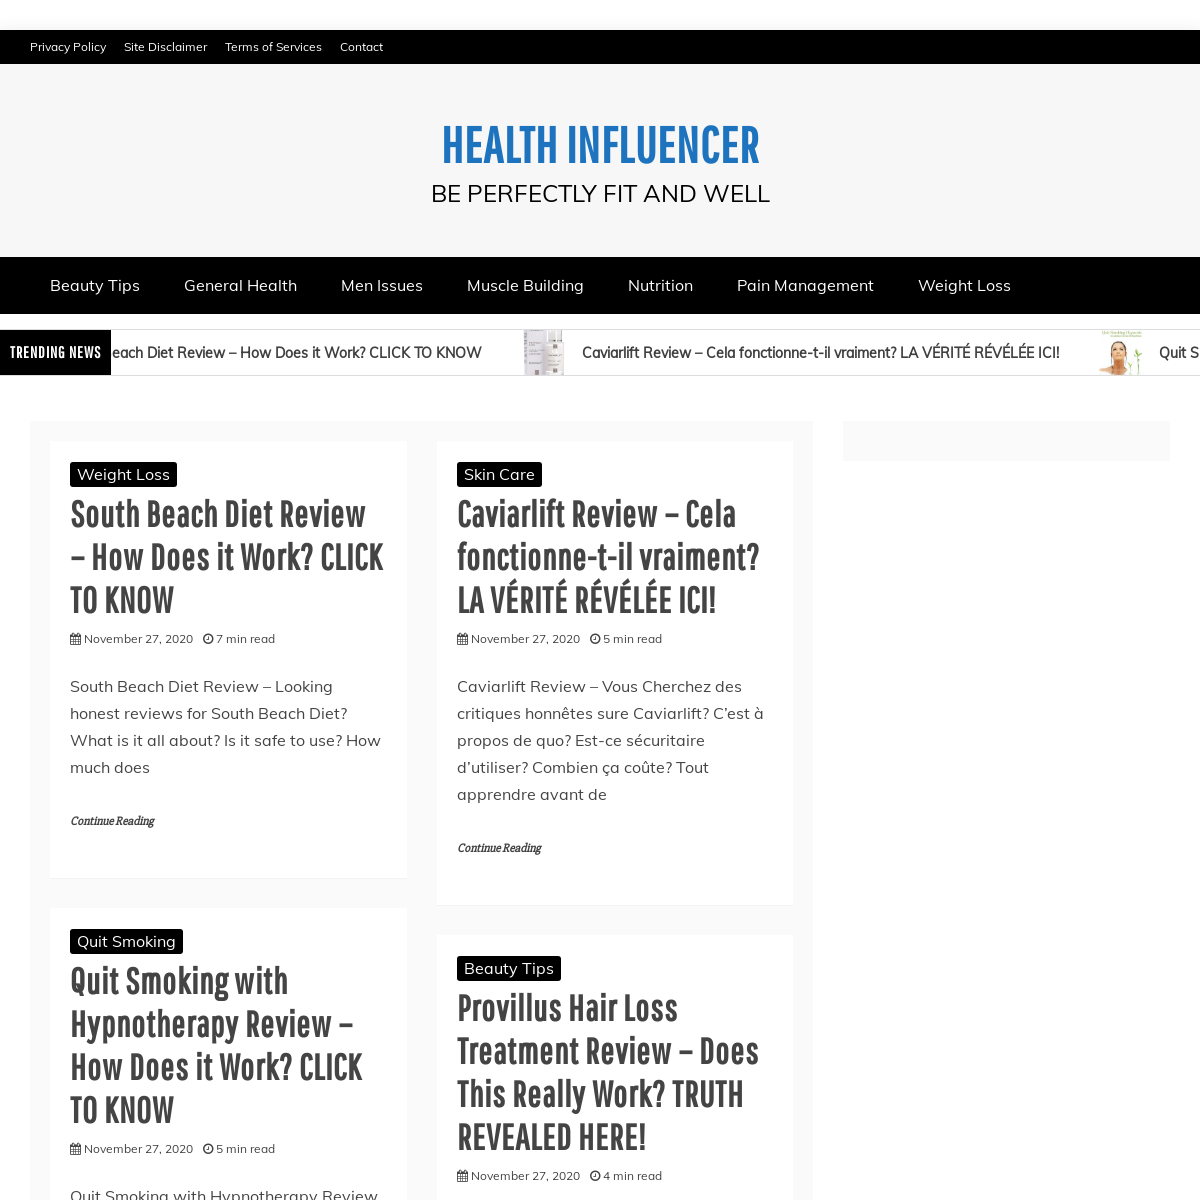 A complete backup of healthinfluencer.net